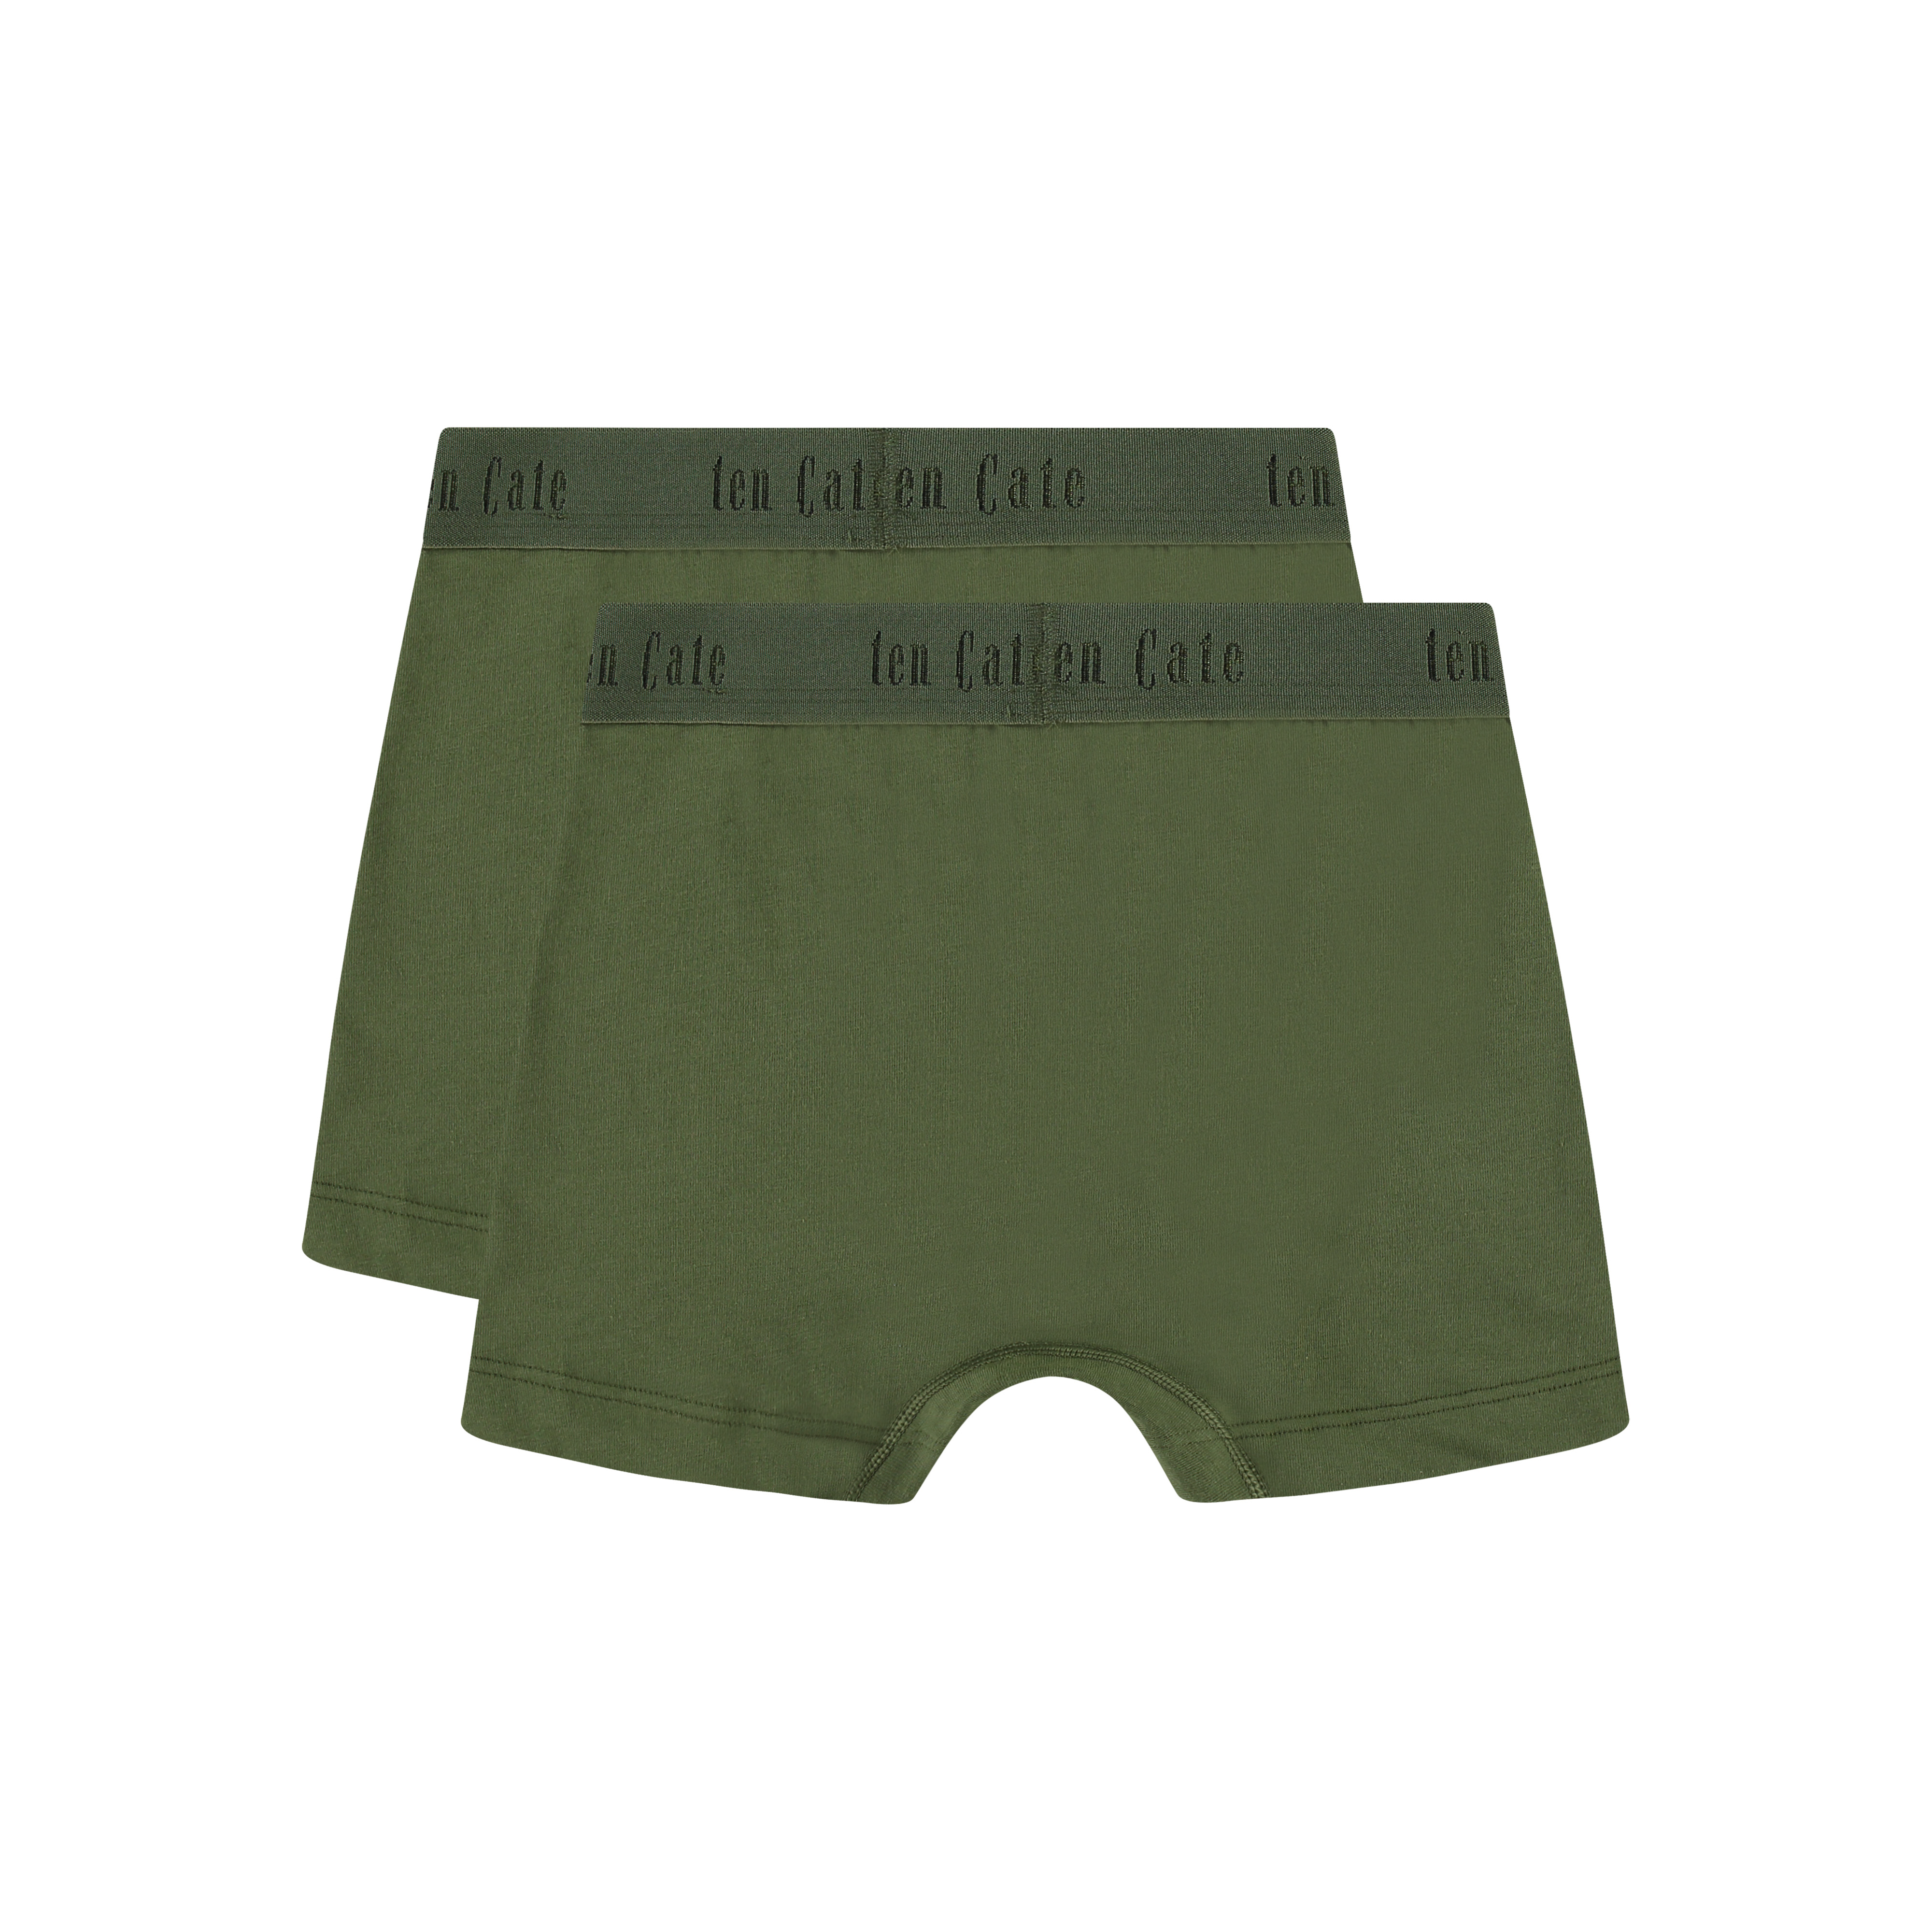 shorts army green 2 pack